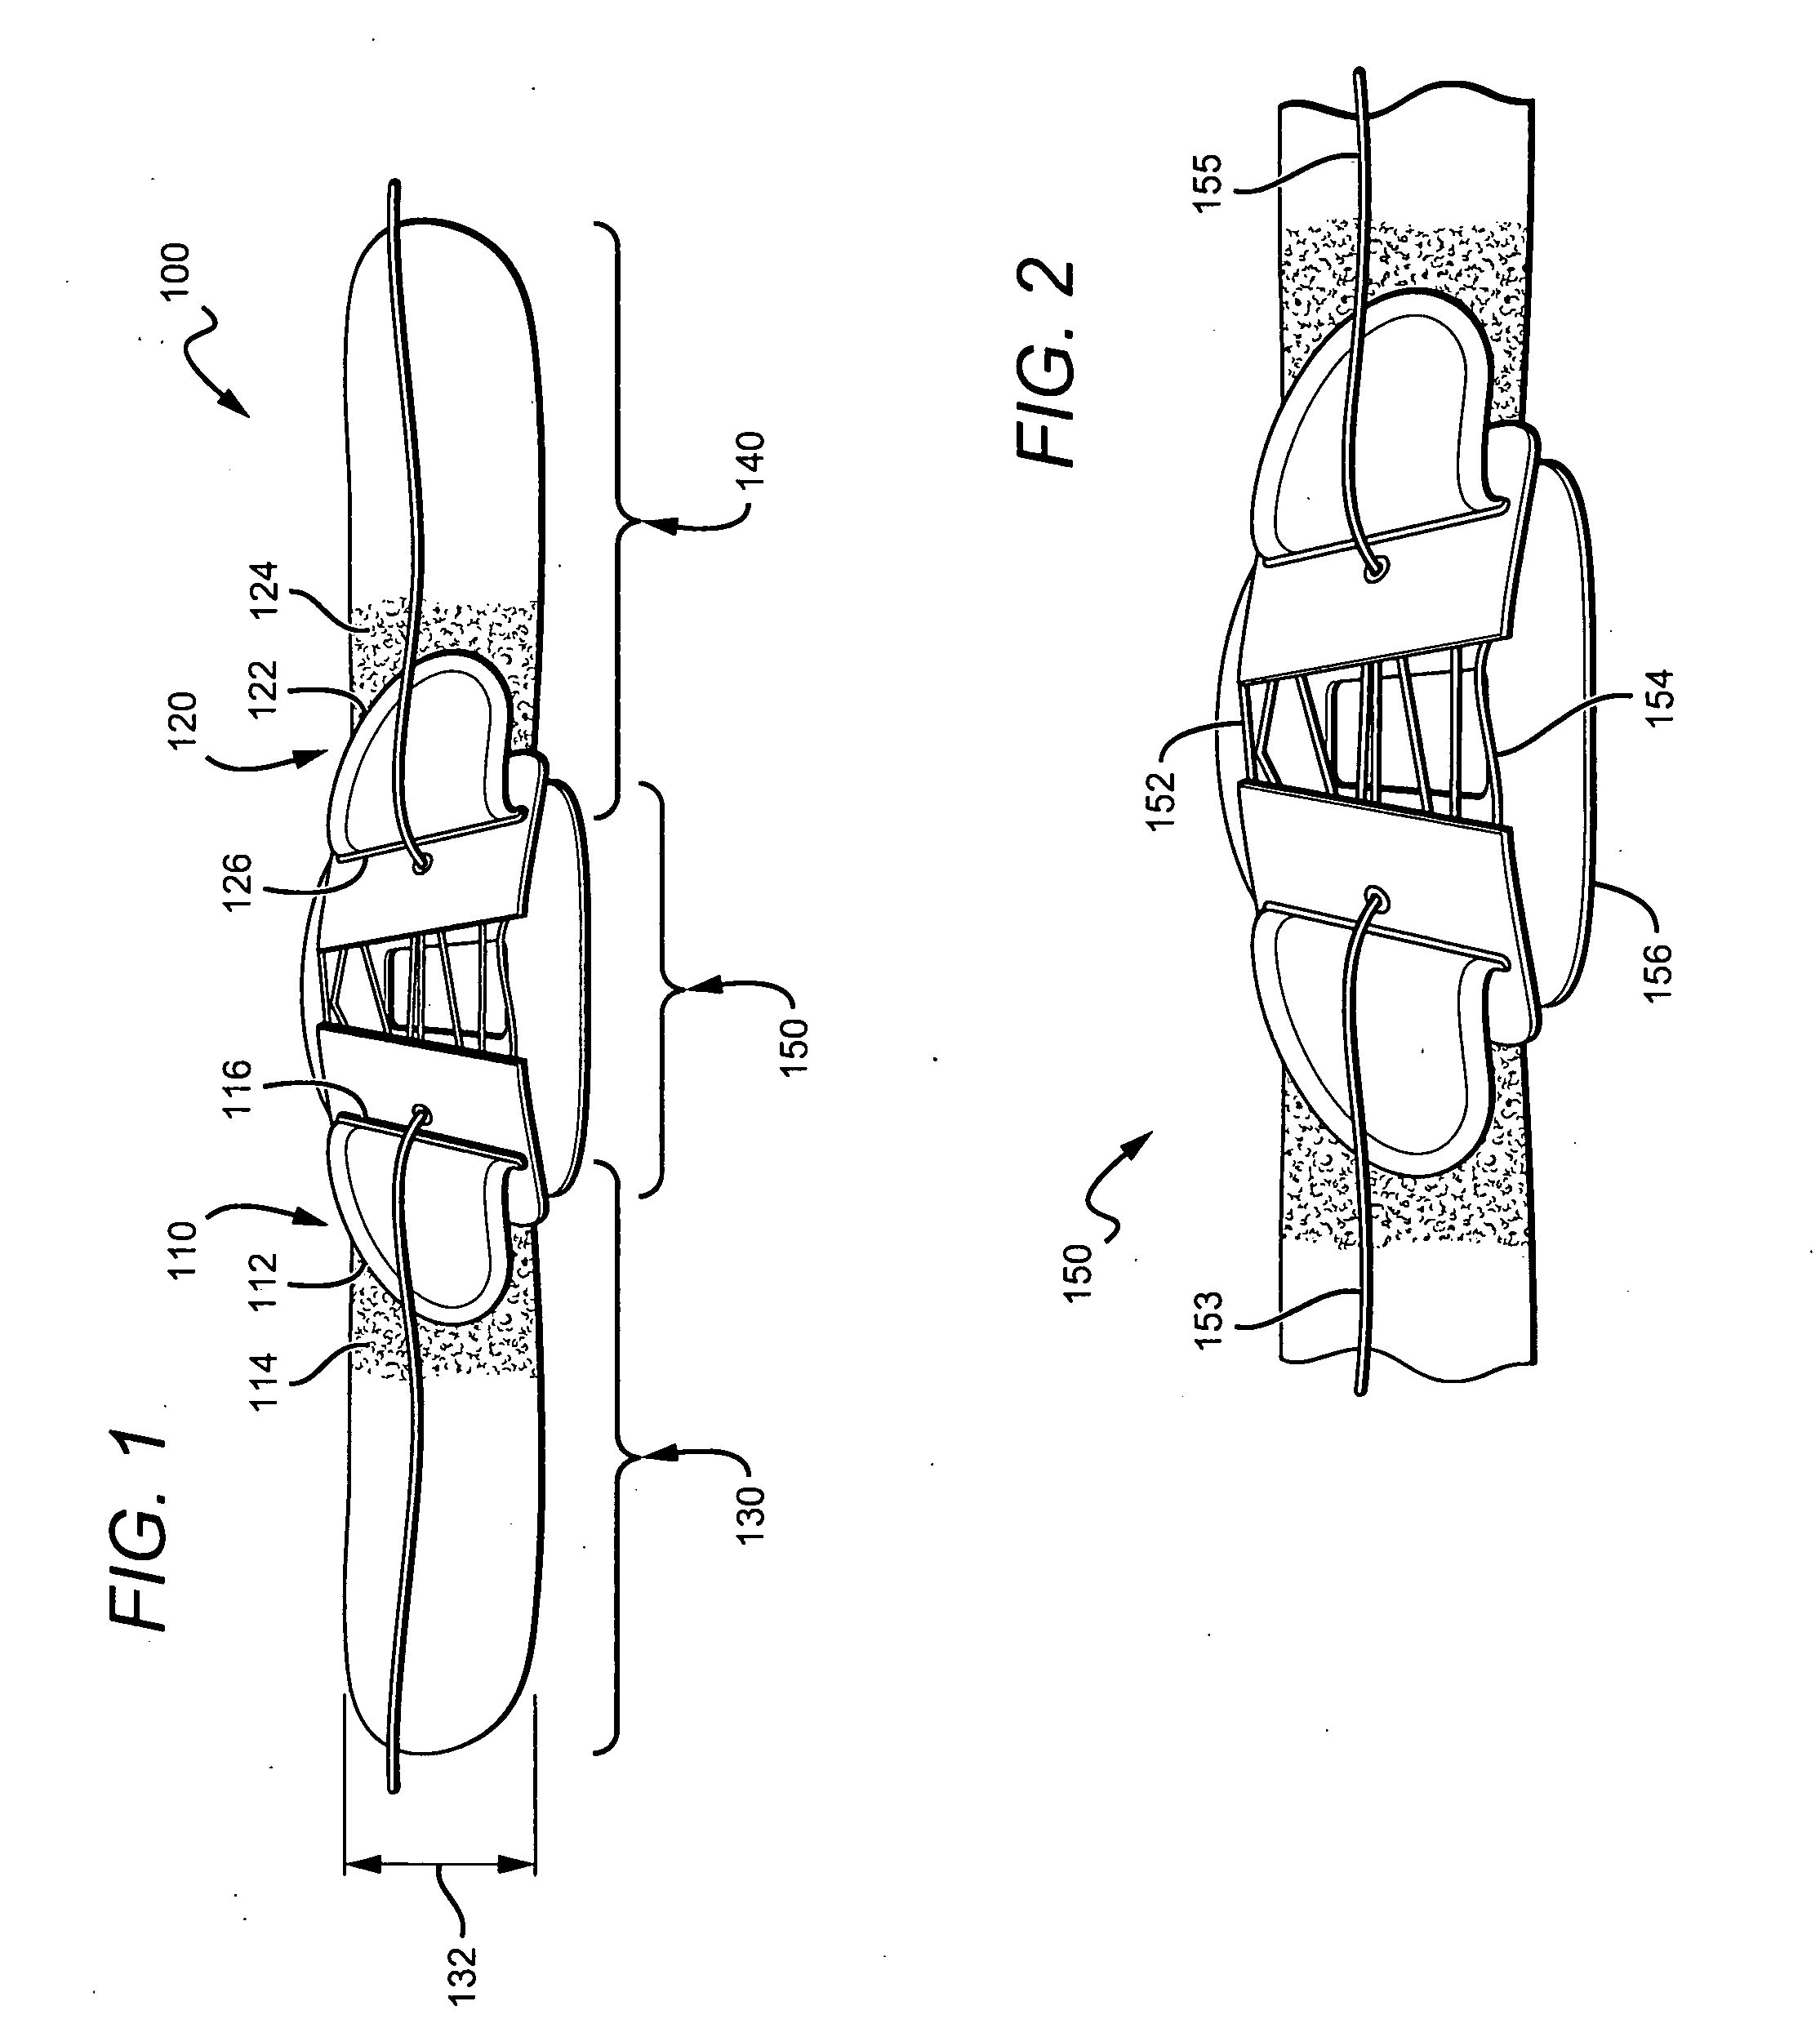 Highly Adjustable Lumbar Support And Methods